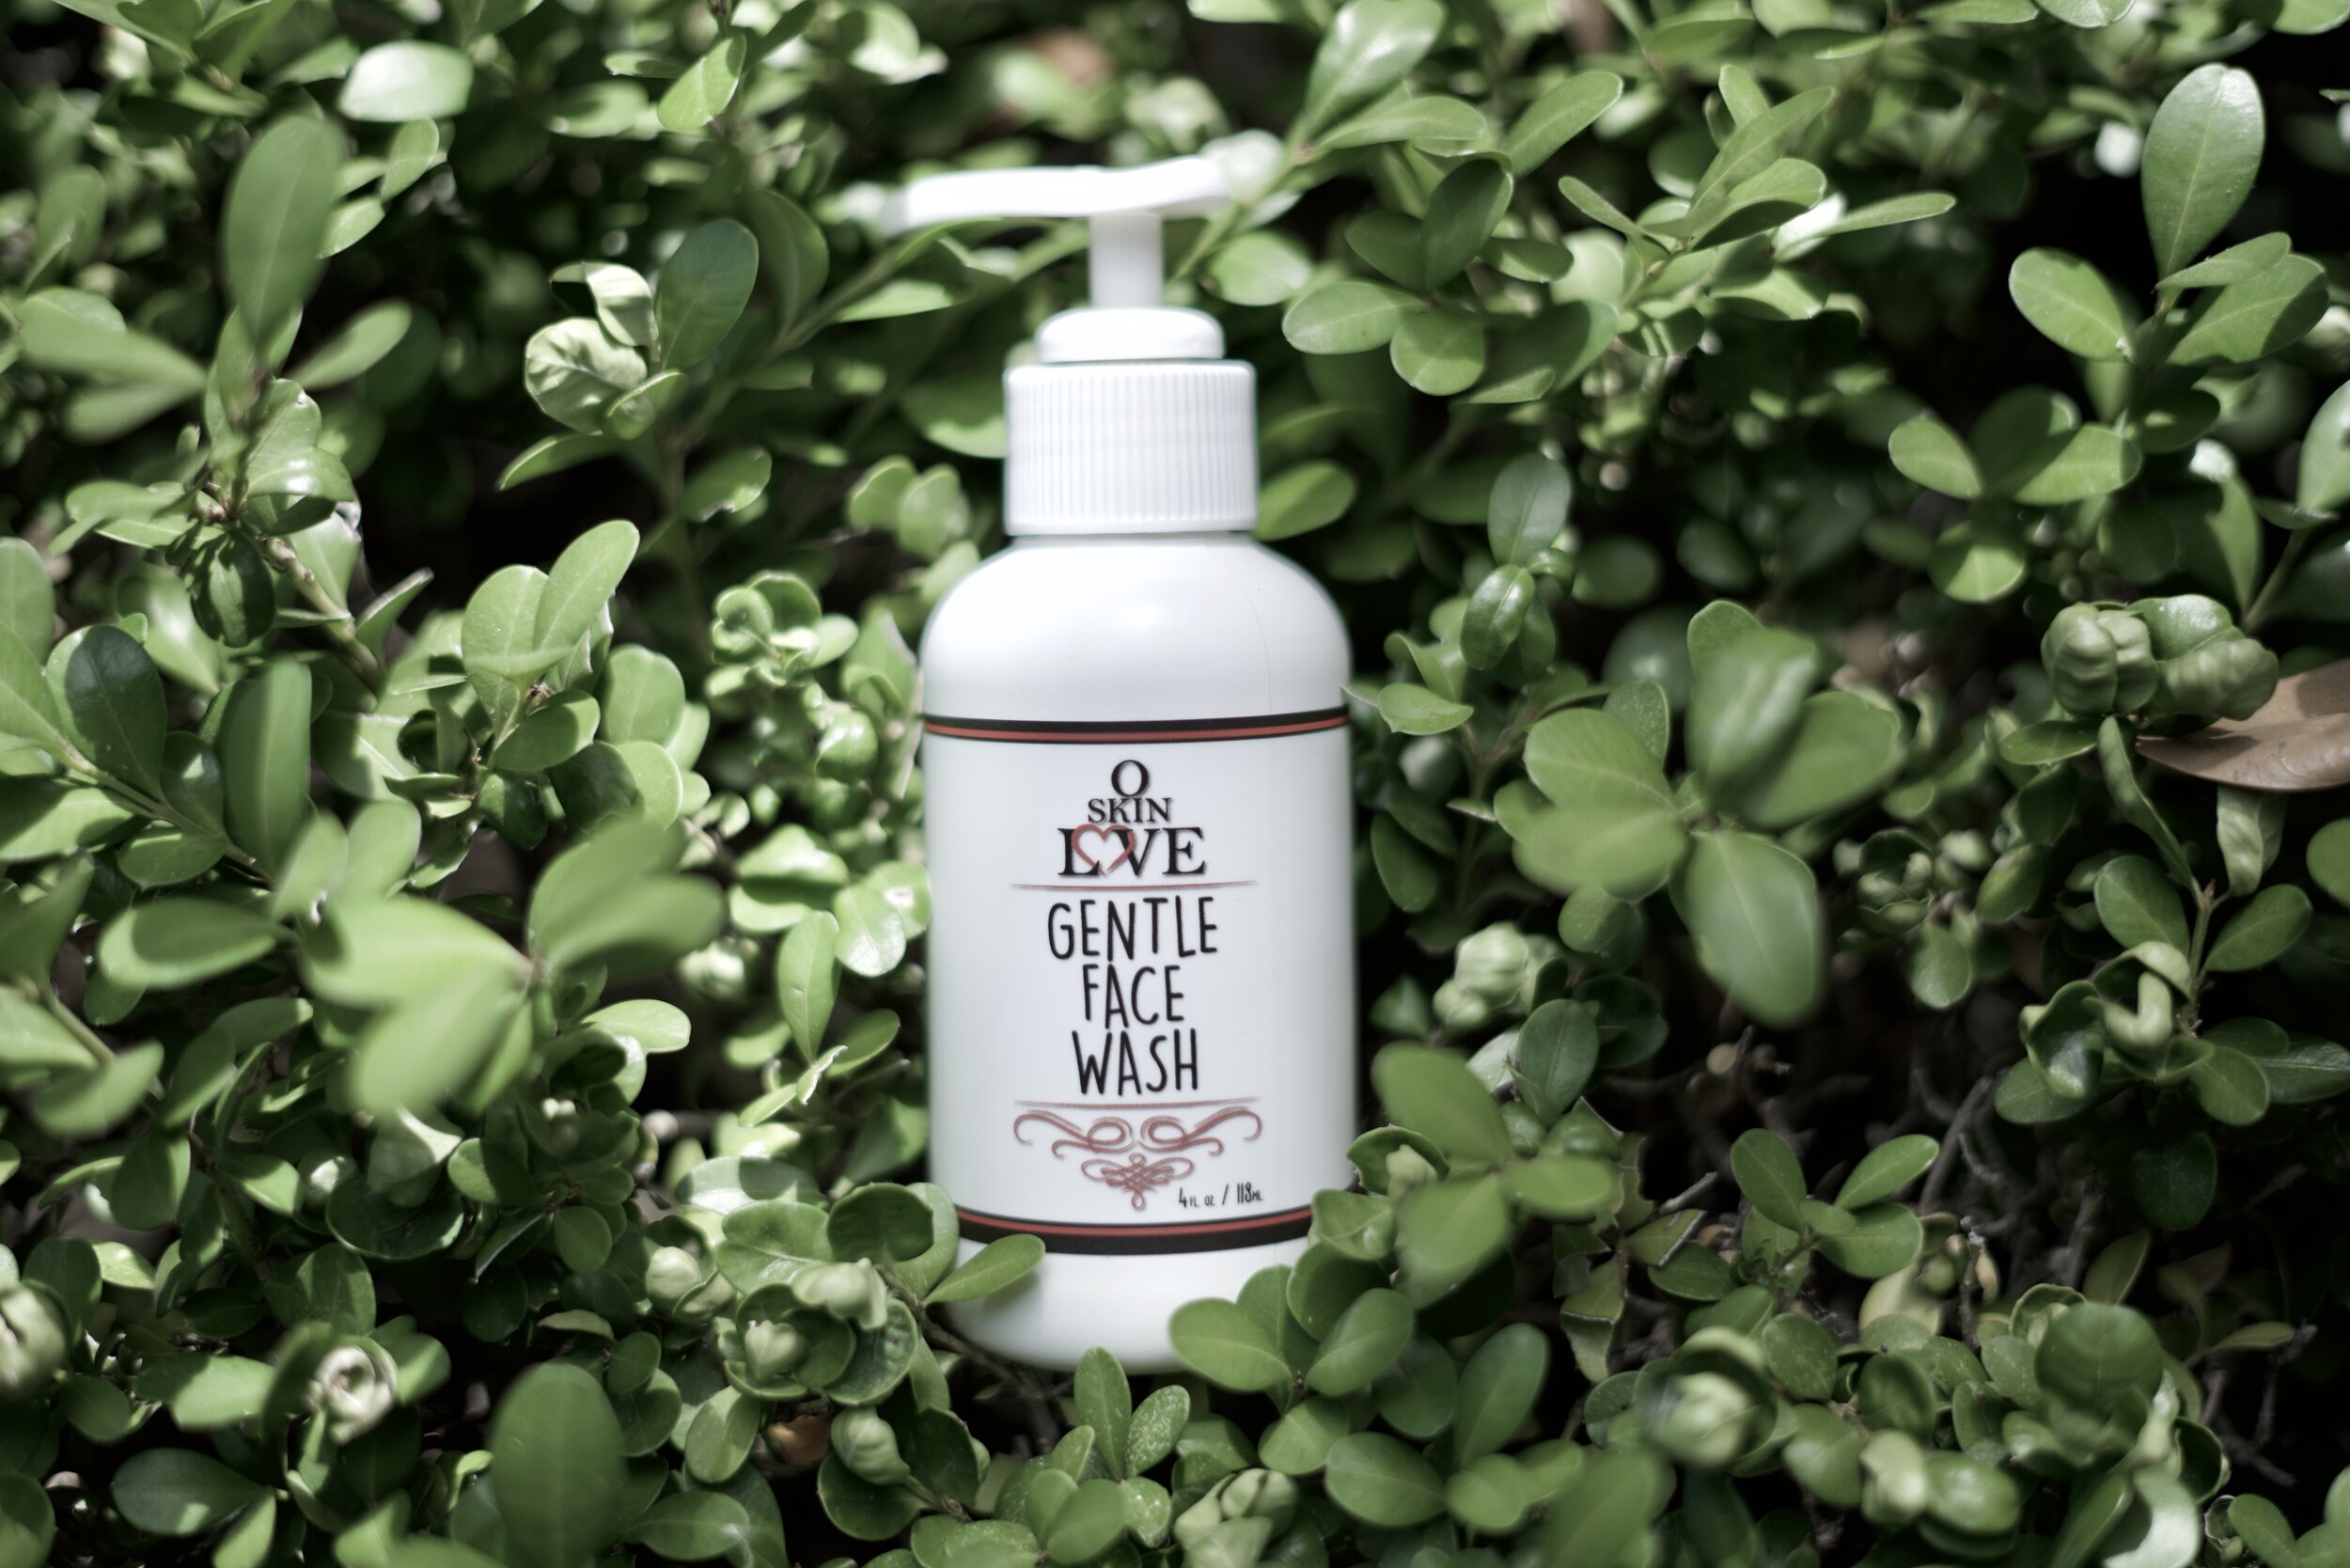 O Sikn Love - Gentle Face Wash